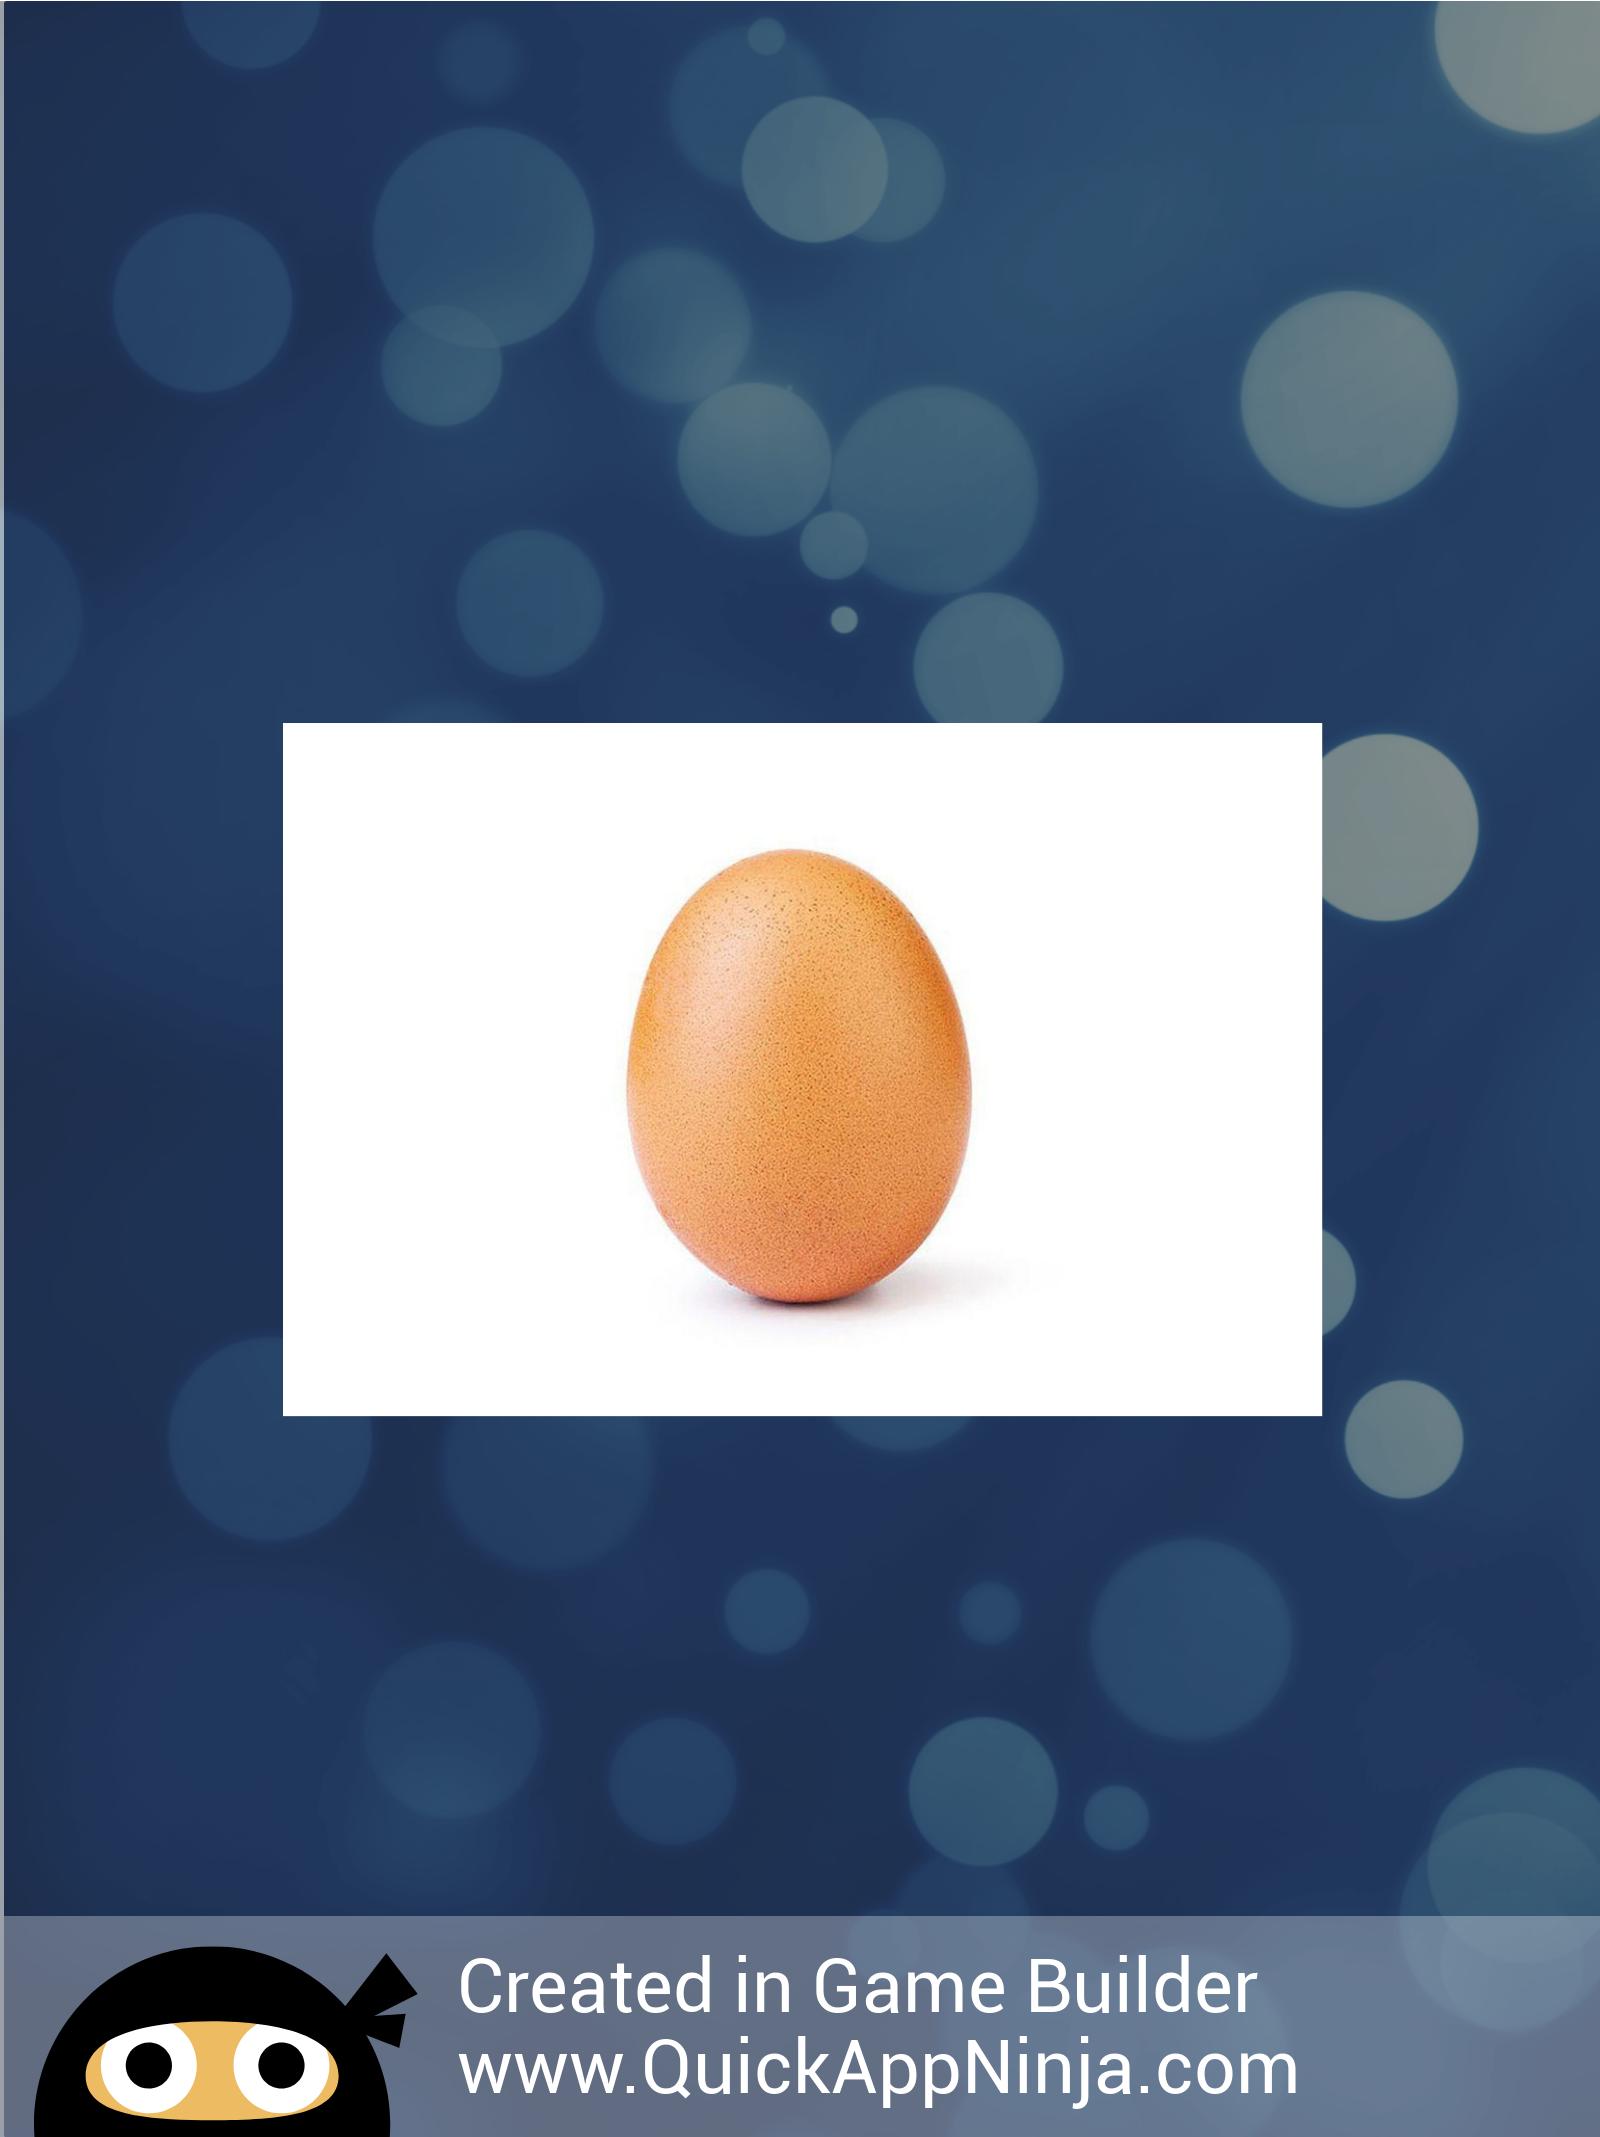 Guess The Egg for Android - APK Download